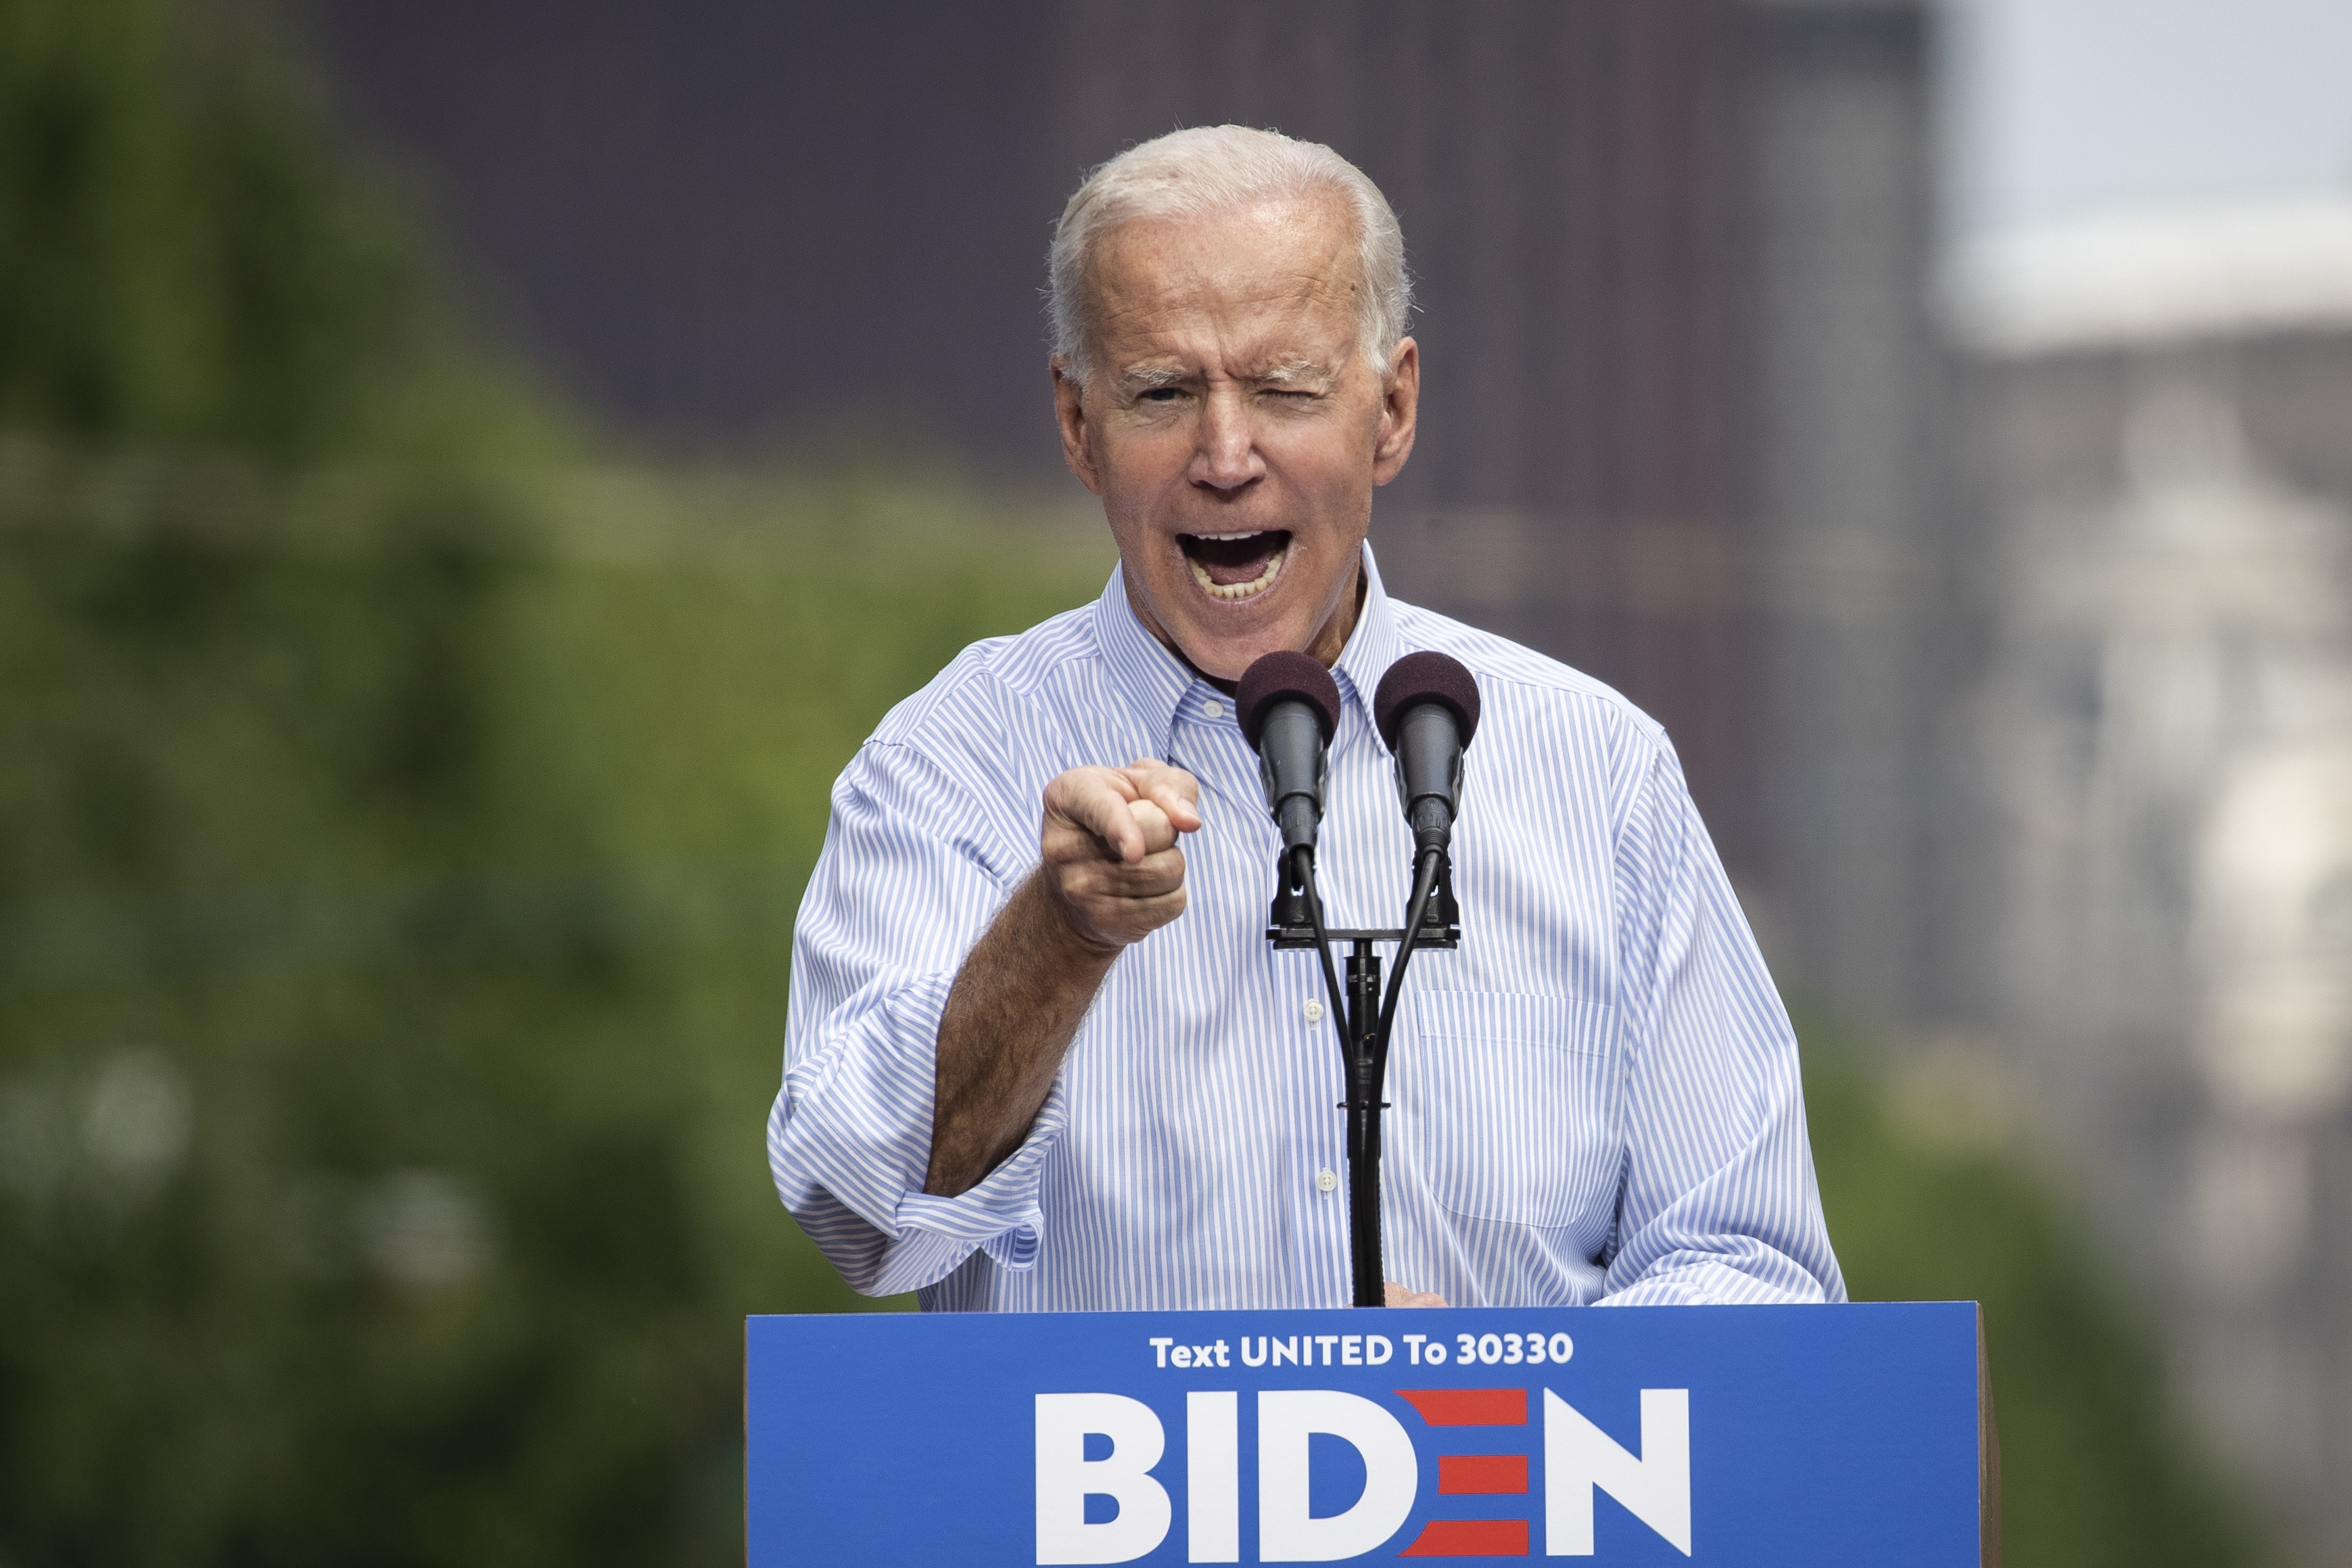 Former U.S. Vice President and Democratic presidential candidate Joe Biden speaks during a campaign kickoff rally. (Drew Angerer/Getty Images)